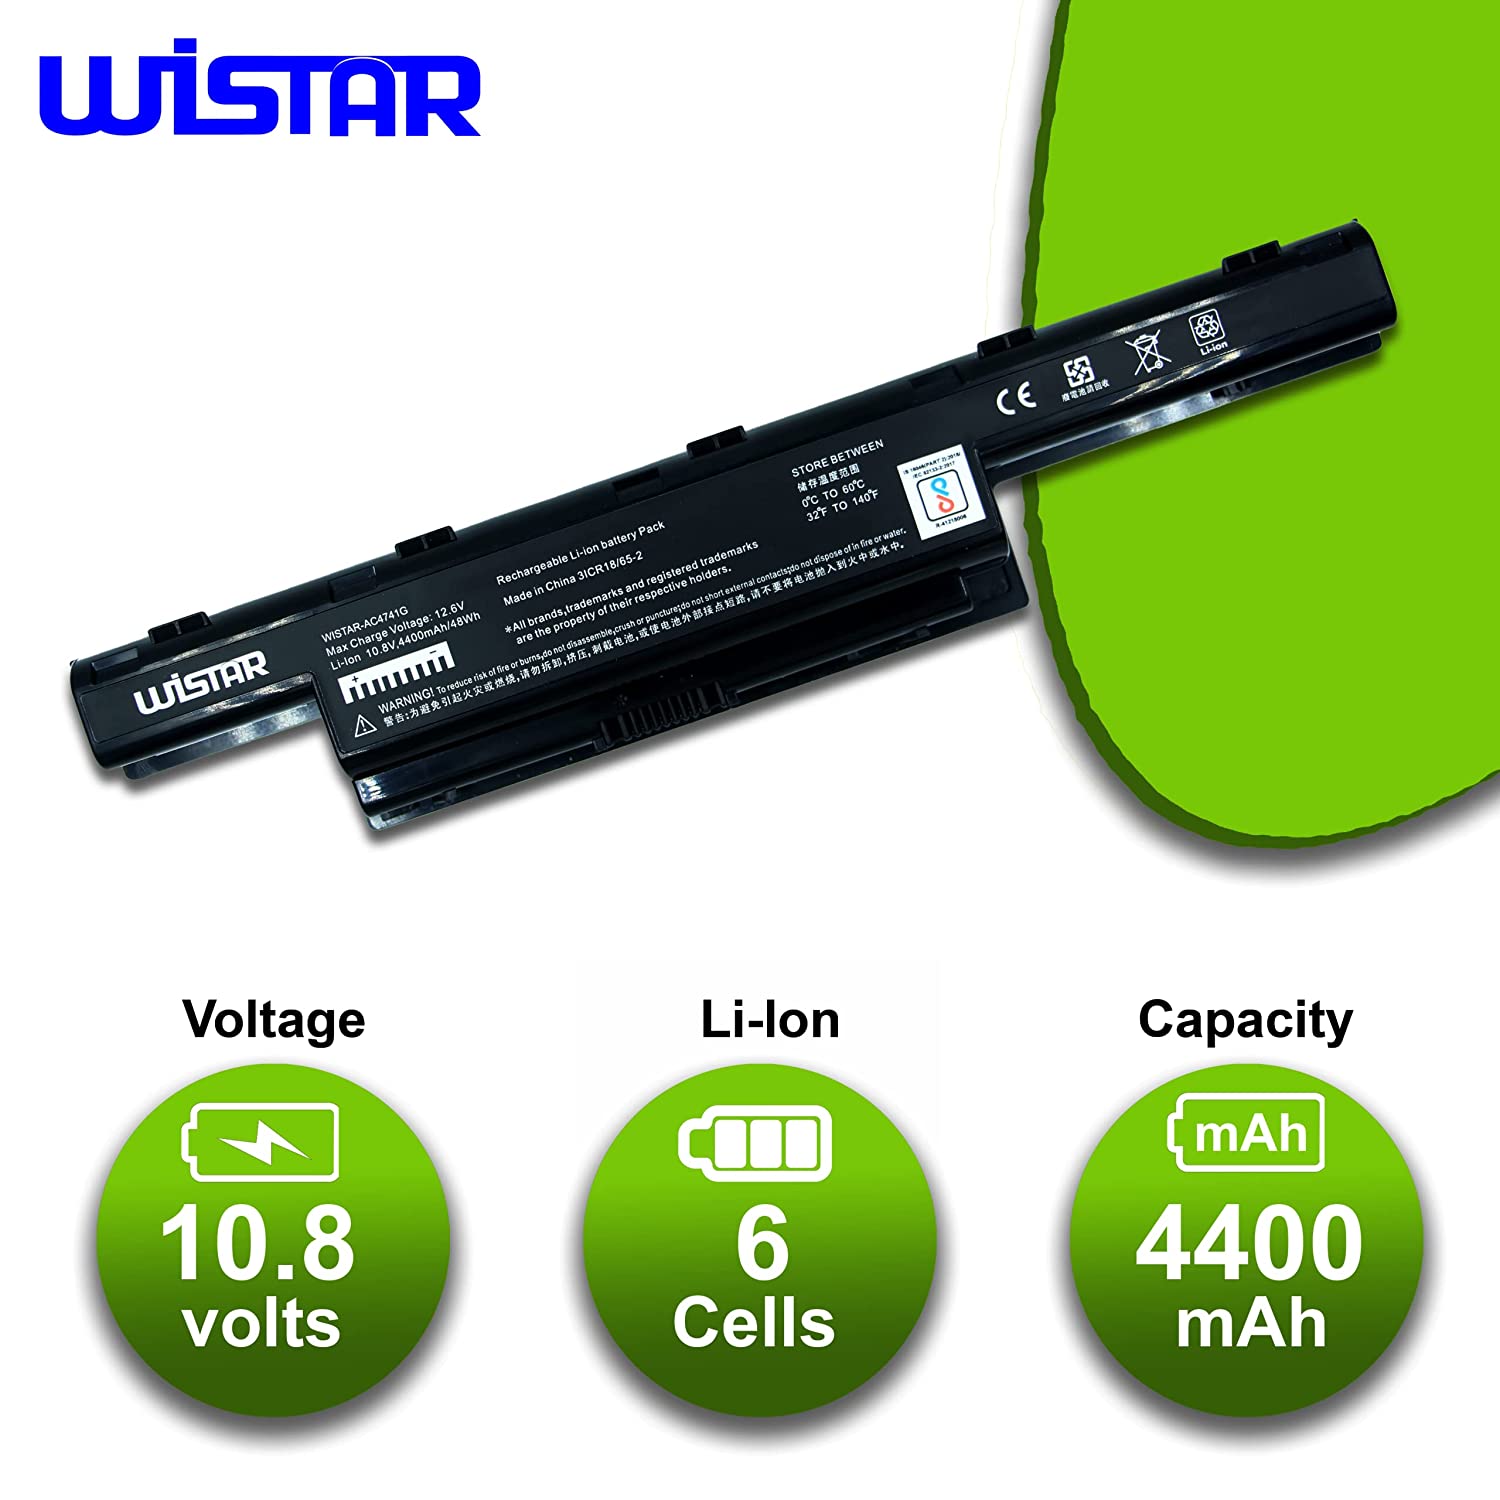 WISTAR AS10D31 AS10D51 Laptop Battery for ACER Aspire 4253 4750 4551 4552 4738 4741 4771 5251 5253 5542 5551 5552 5560 5733 5741 5742 5750 7551 7552 7560 7741 7750 AS5741 Series